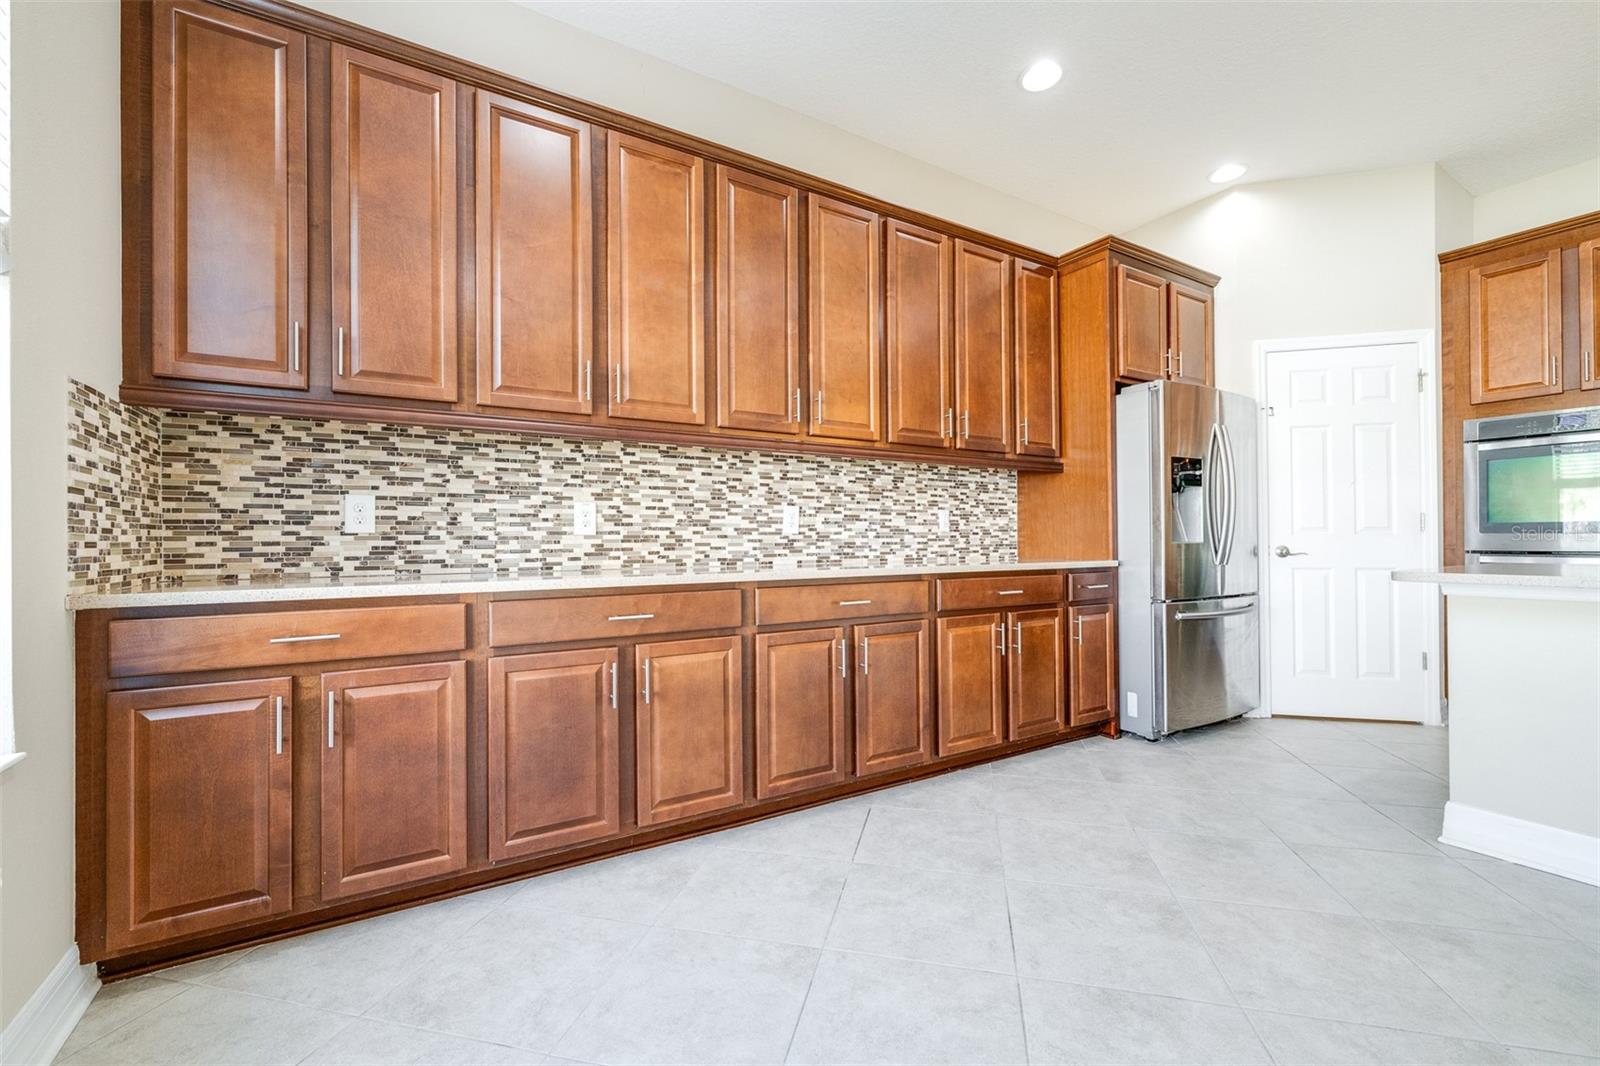 Extra, upgraded cabinets line the entire wall!